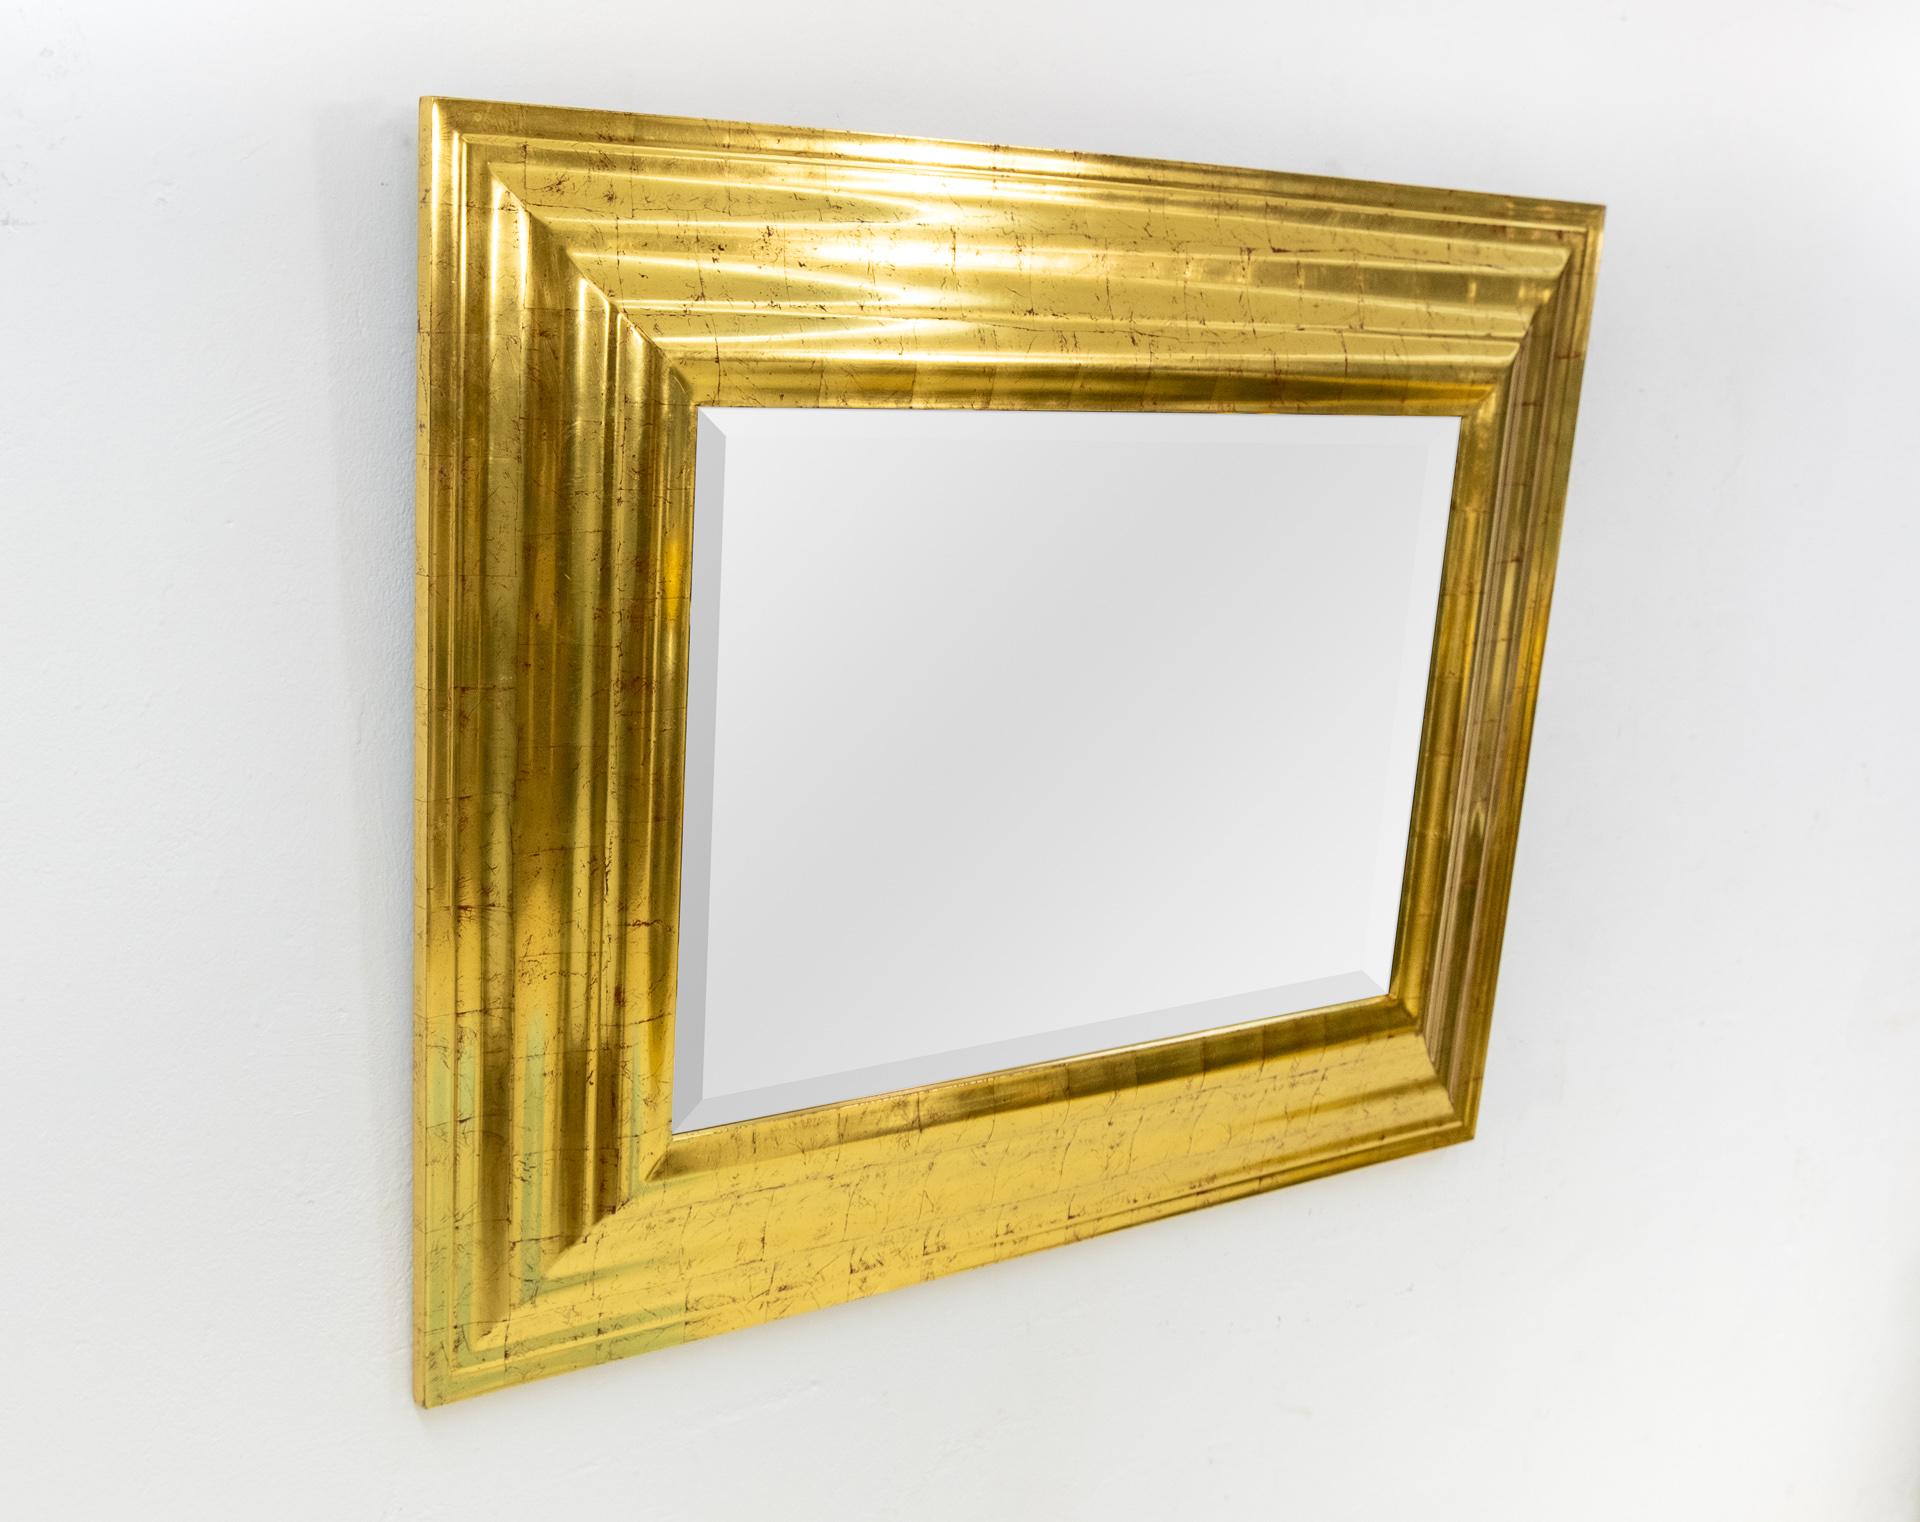 Deknudt Belgium 1970s wide frame with Real Gold folie. Striking good looking.
Horizontal or vertical use. Signed. Good quality mirror.